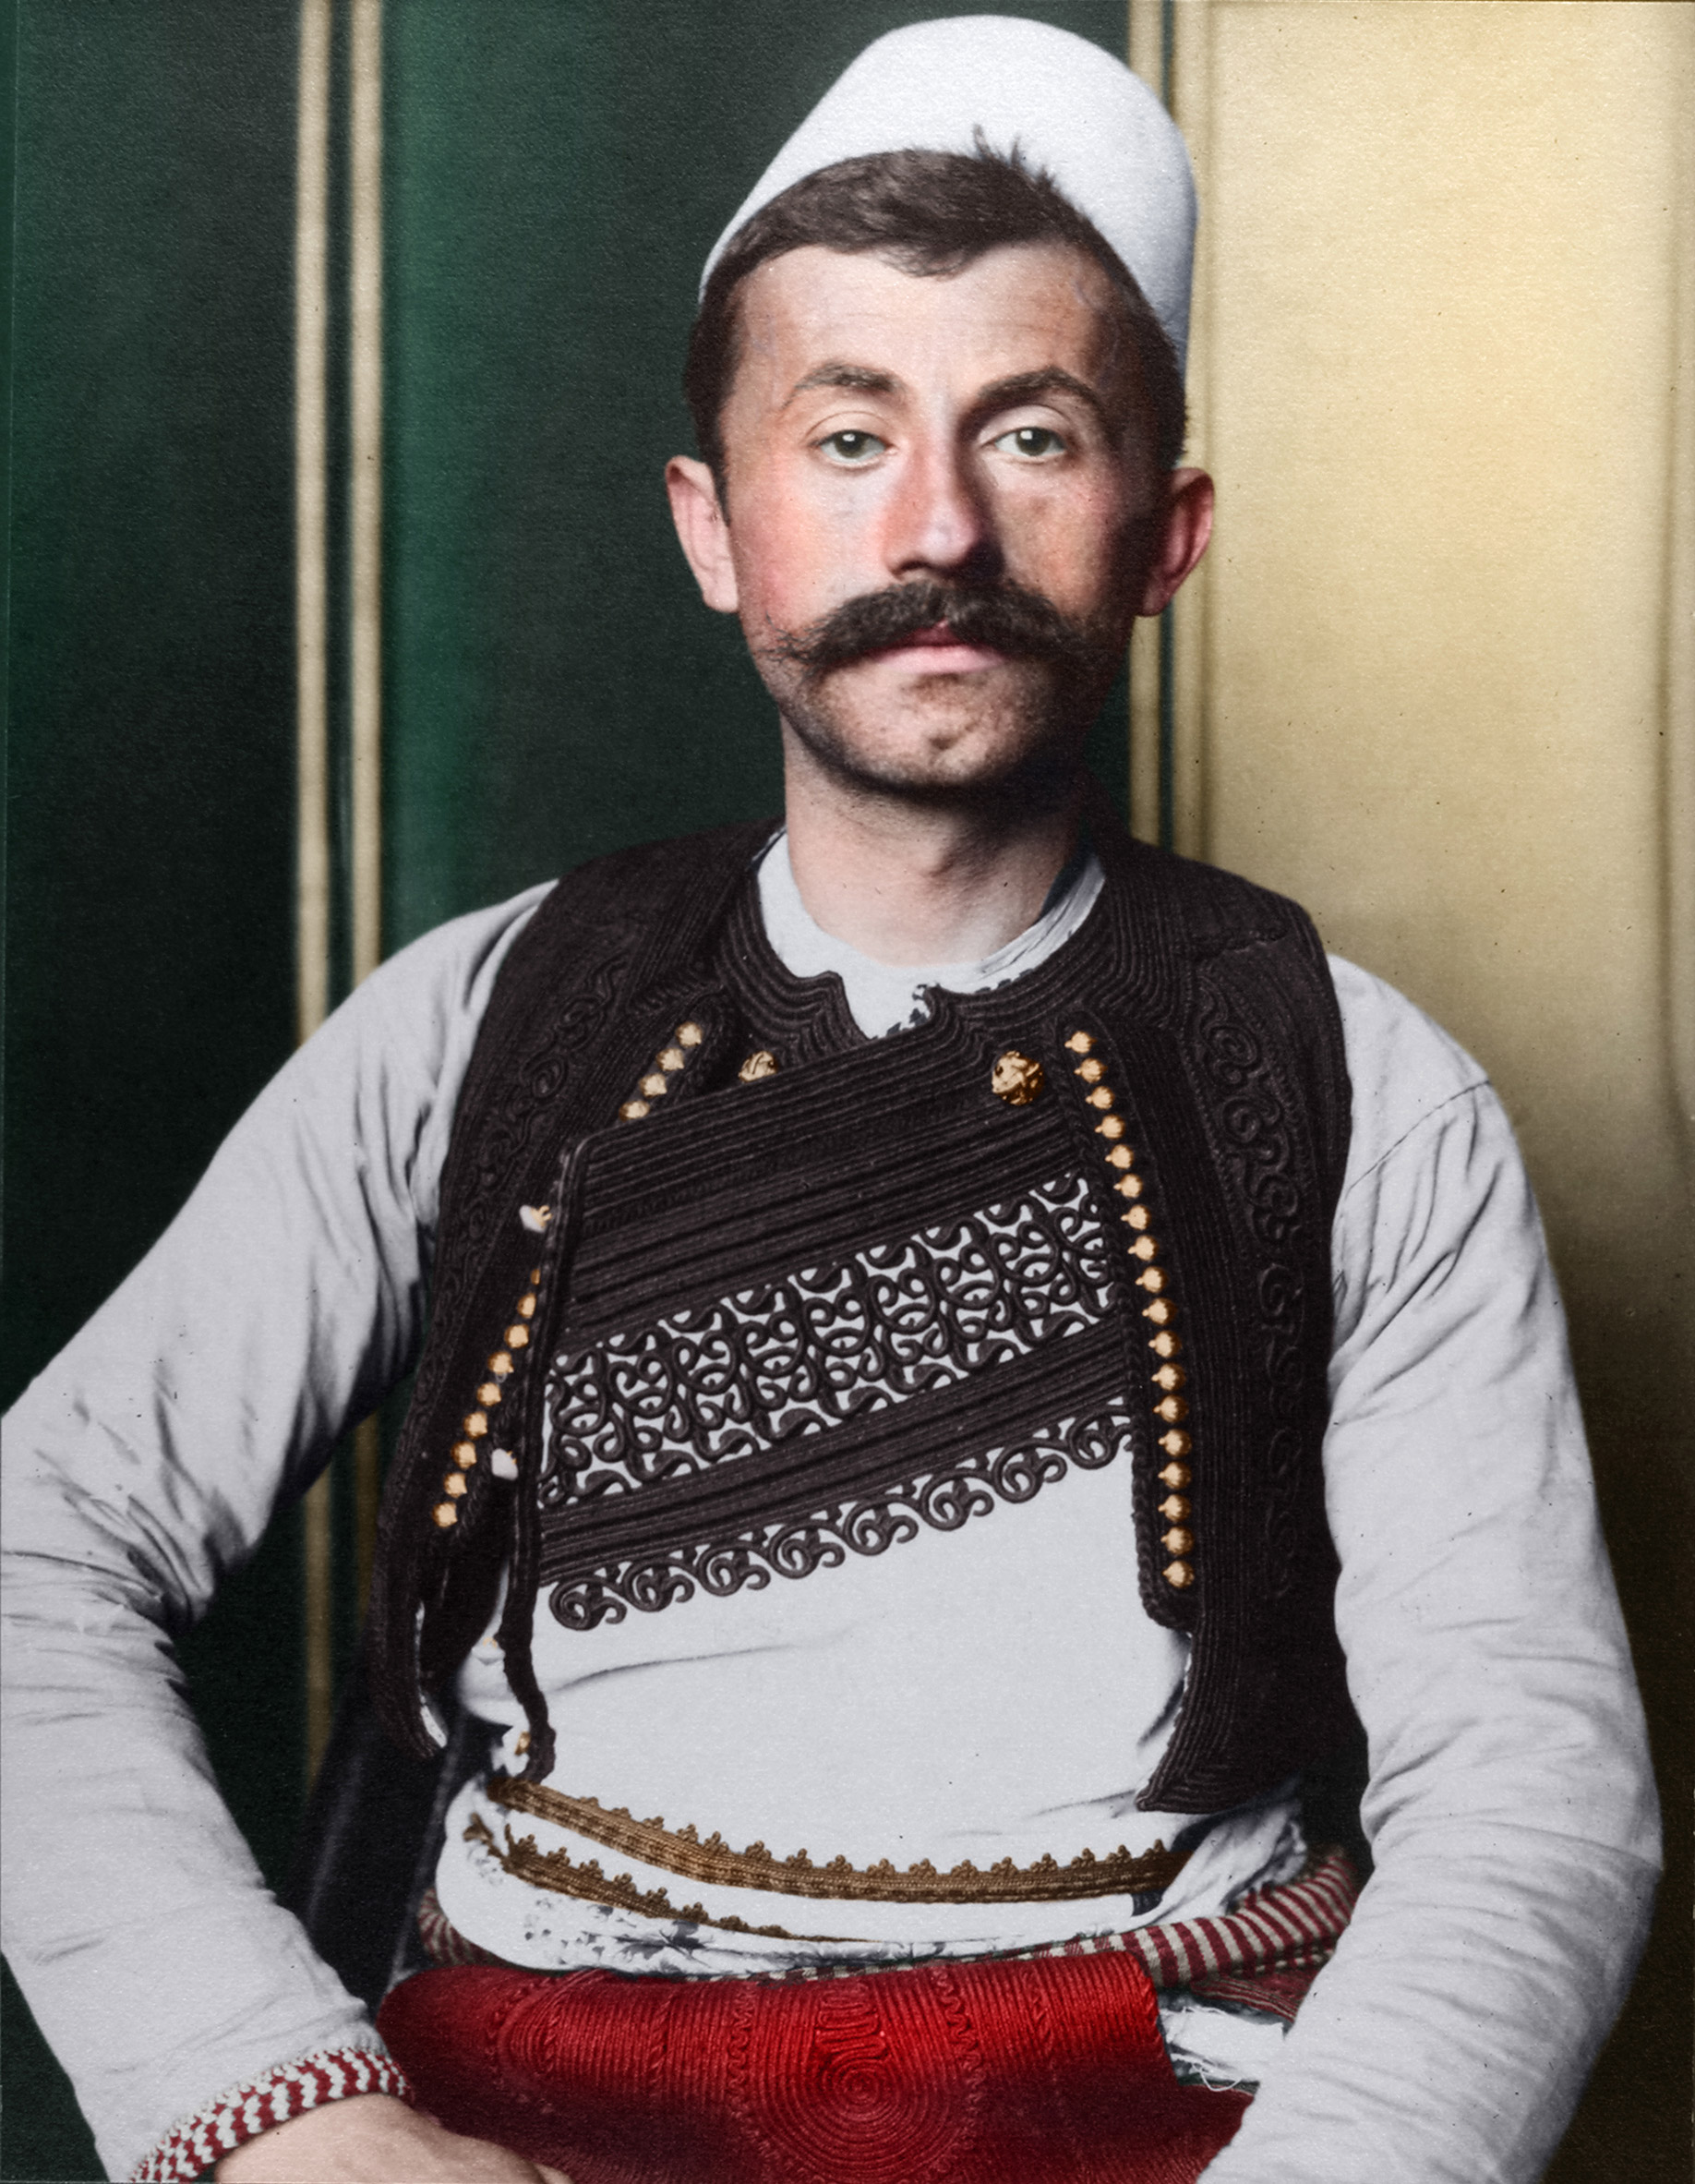 Portrait of an Albanian soldier at the Ellis Island Immigration Station, circa 1905-1914.